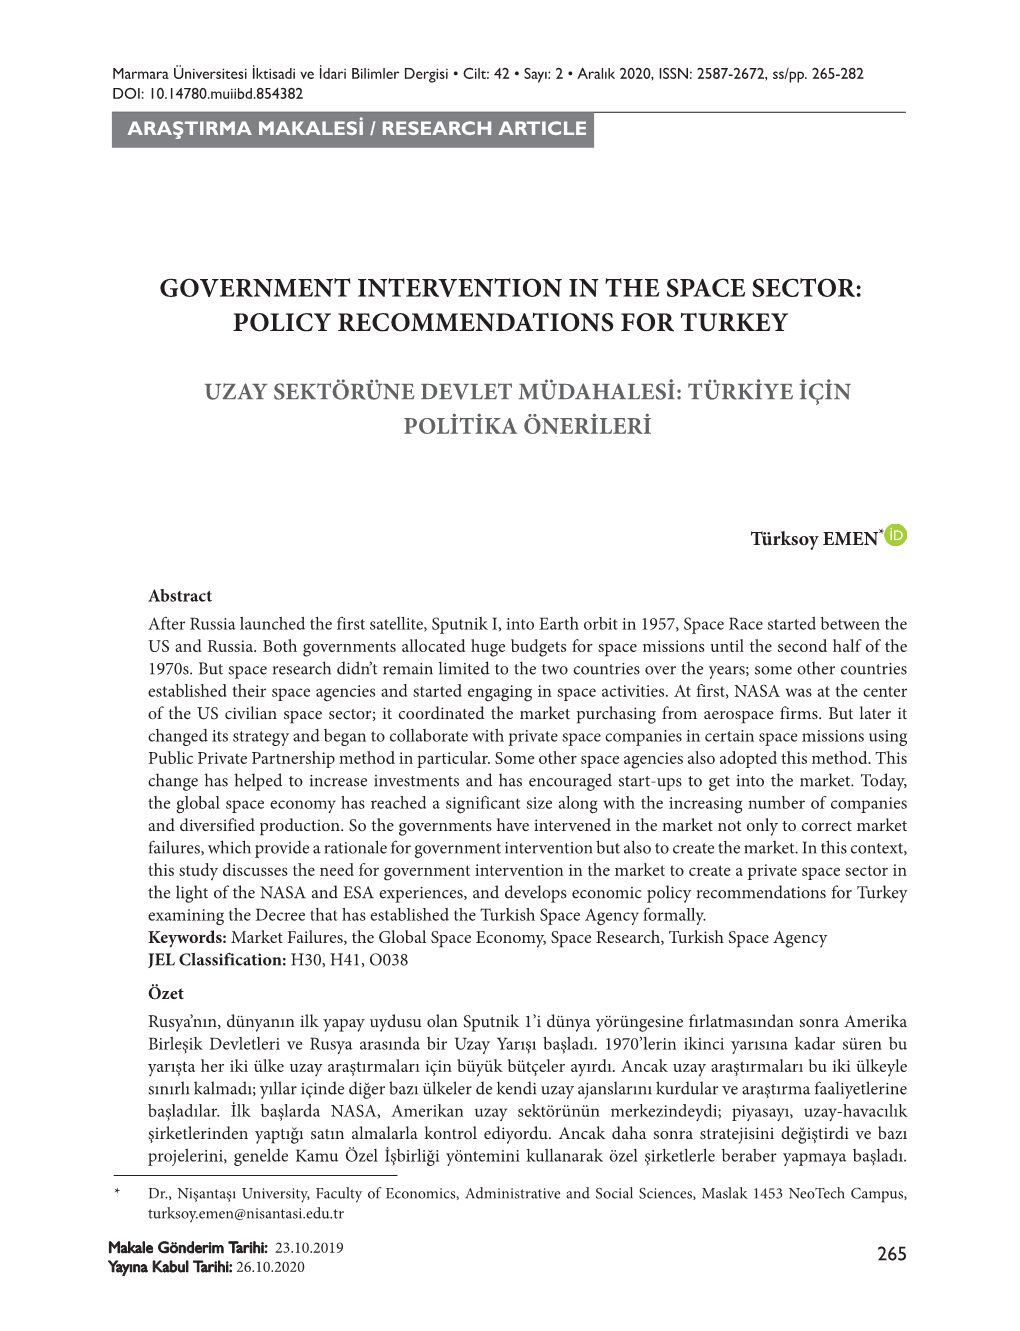 Government Intervention in the Space Sector: Policy Recommendations for Turkey